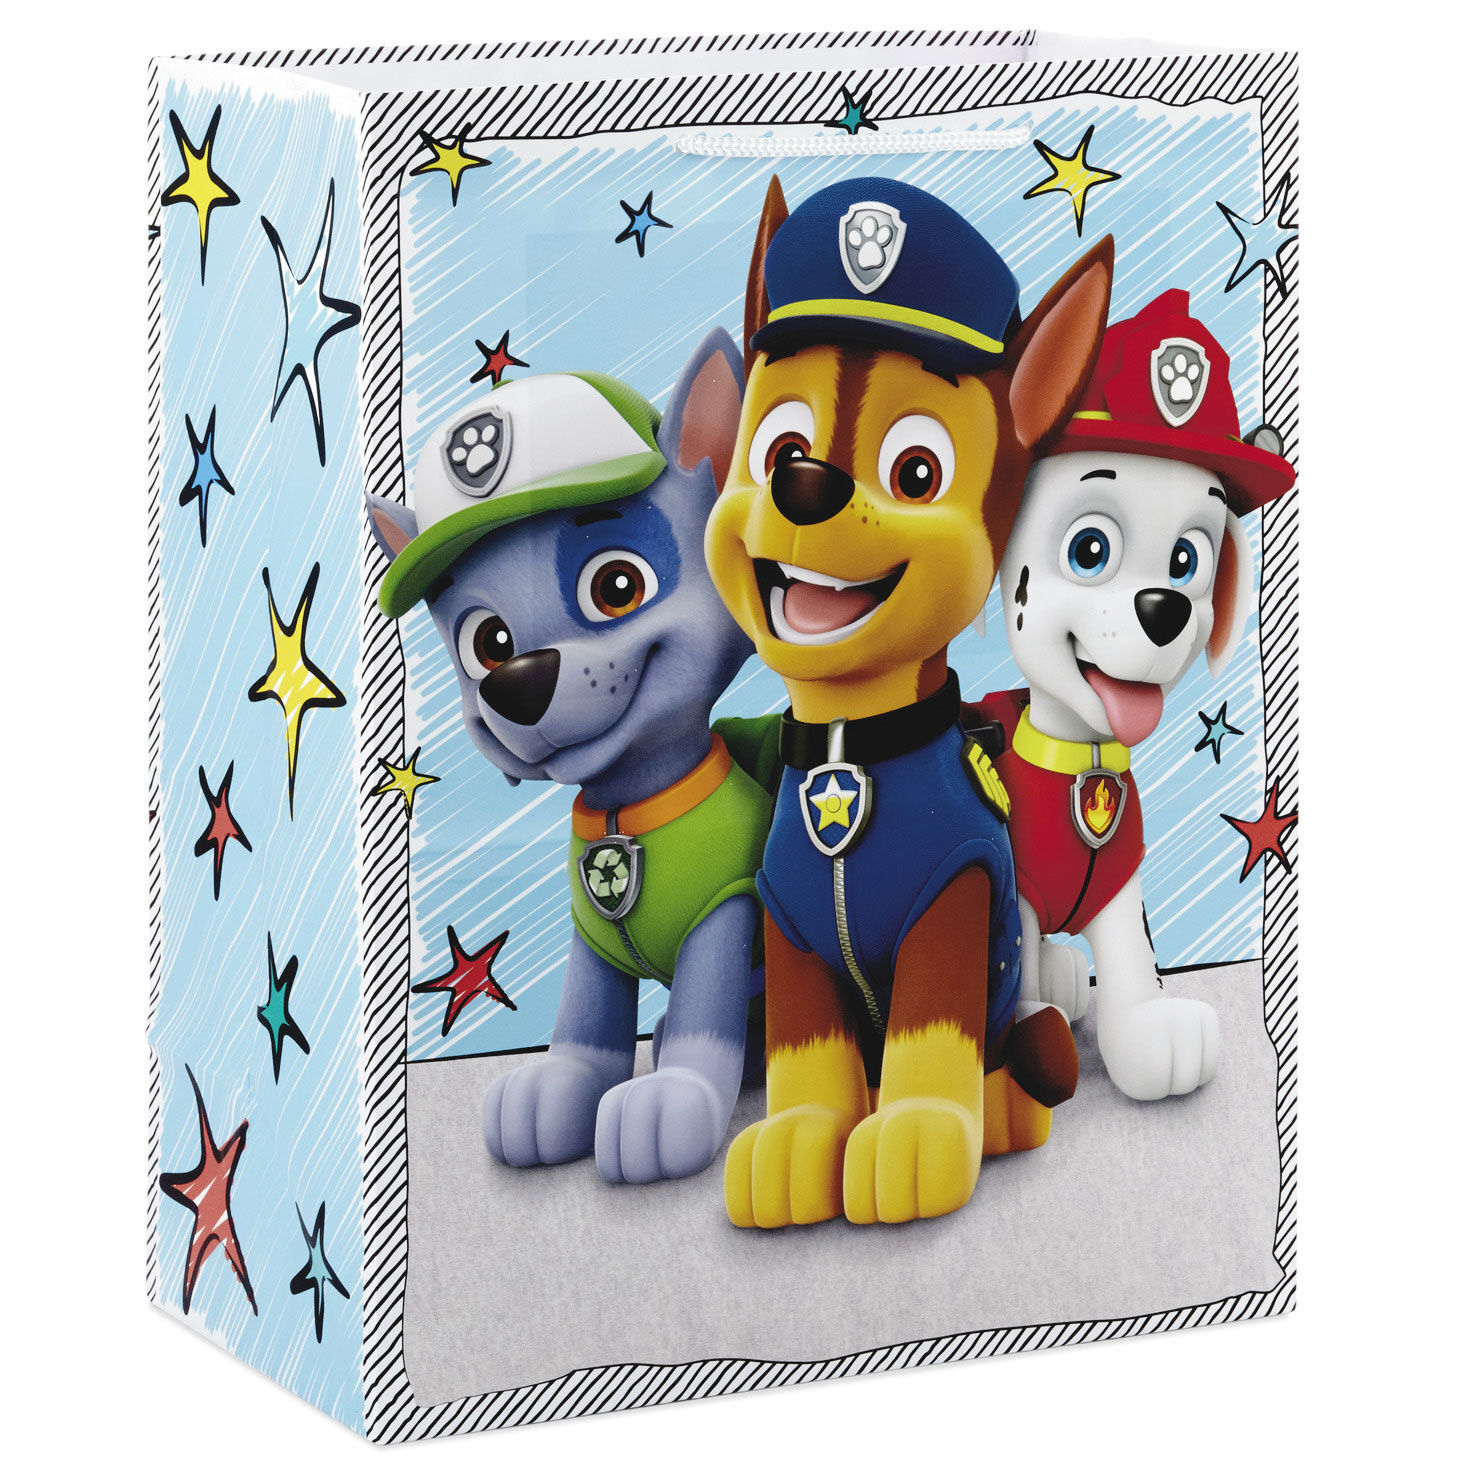 Paw patrol fan mug perfect present for your son or daughter for birthday ot any occasion Mug decorated with Marshall from paw patrol